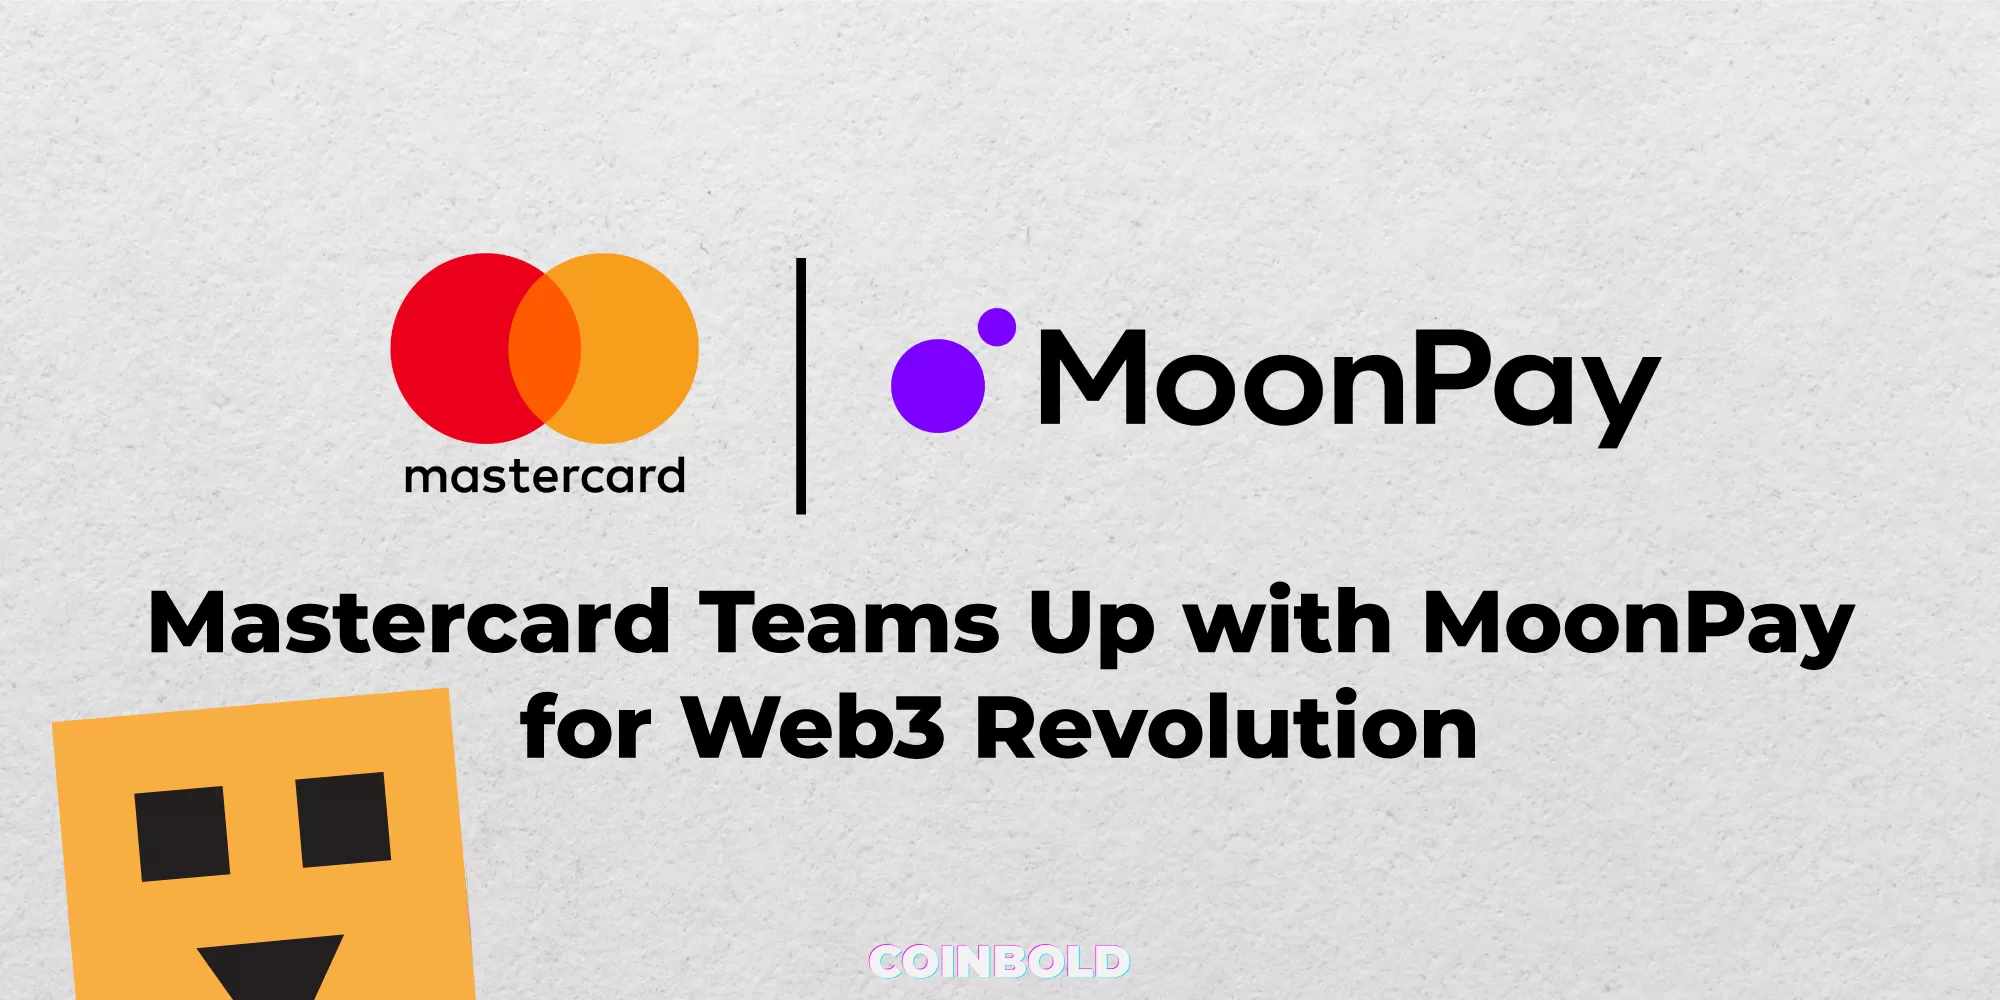 Mastercard Teams Up with MoonPay for Web3 Revolution jpg.webp